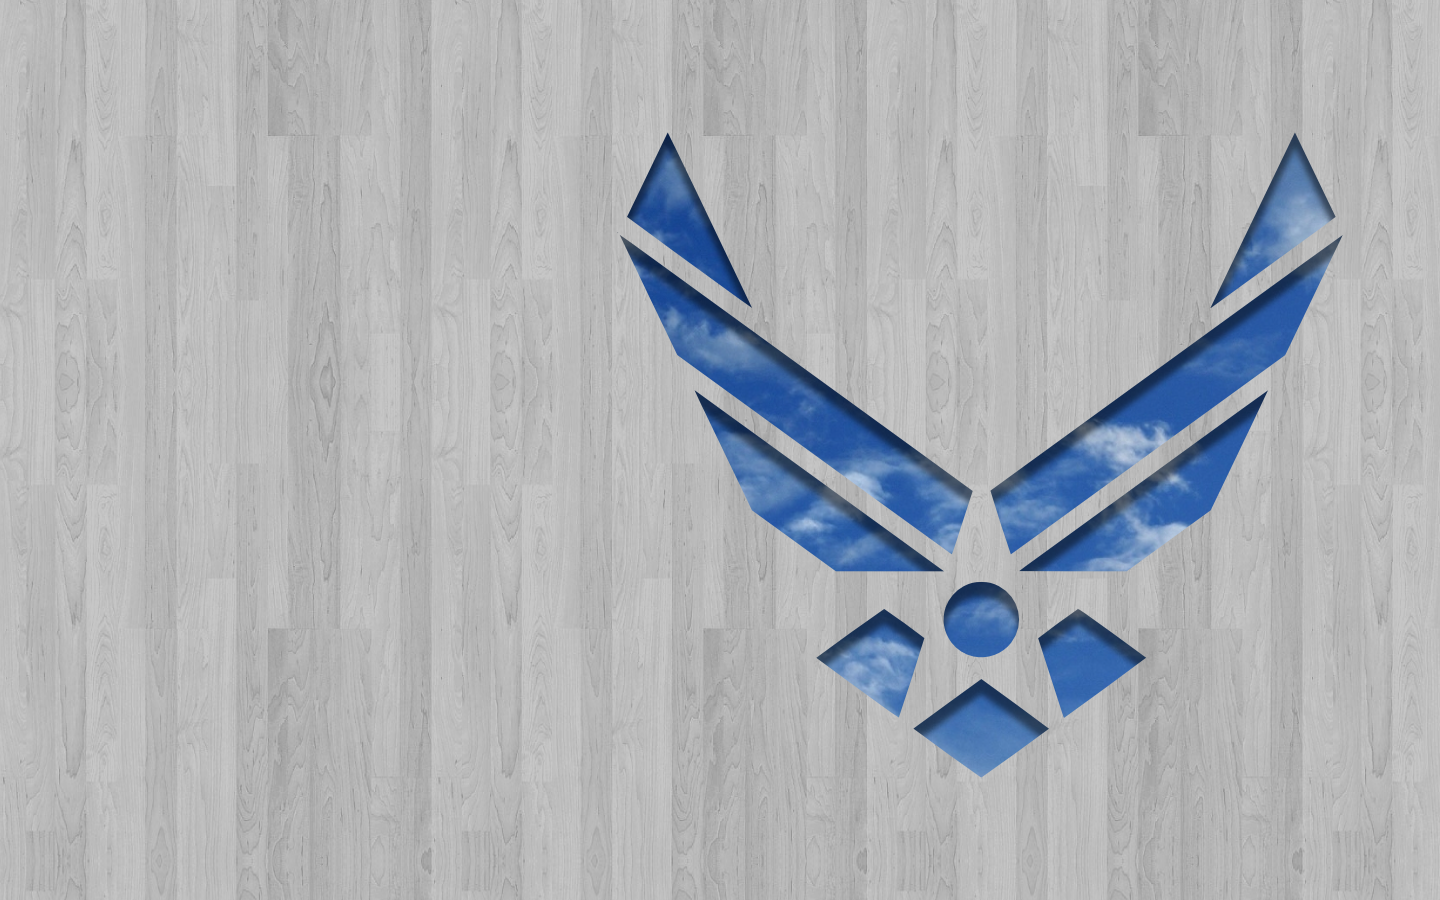 ... usaf wood 1440x900 that it for now just experimenting with ...